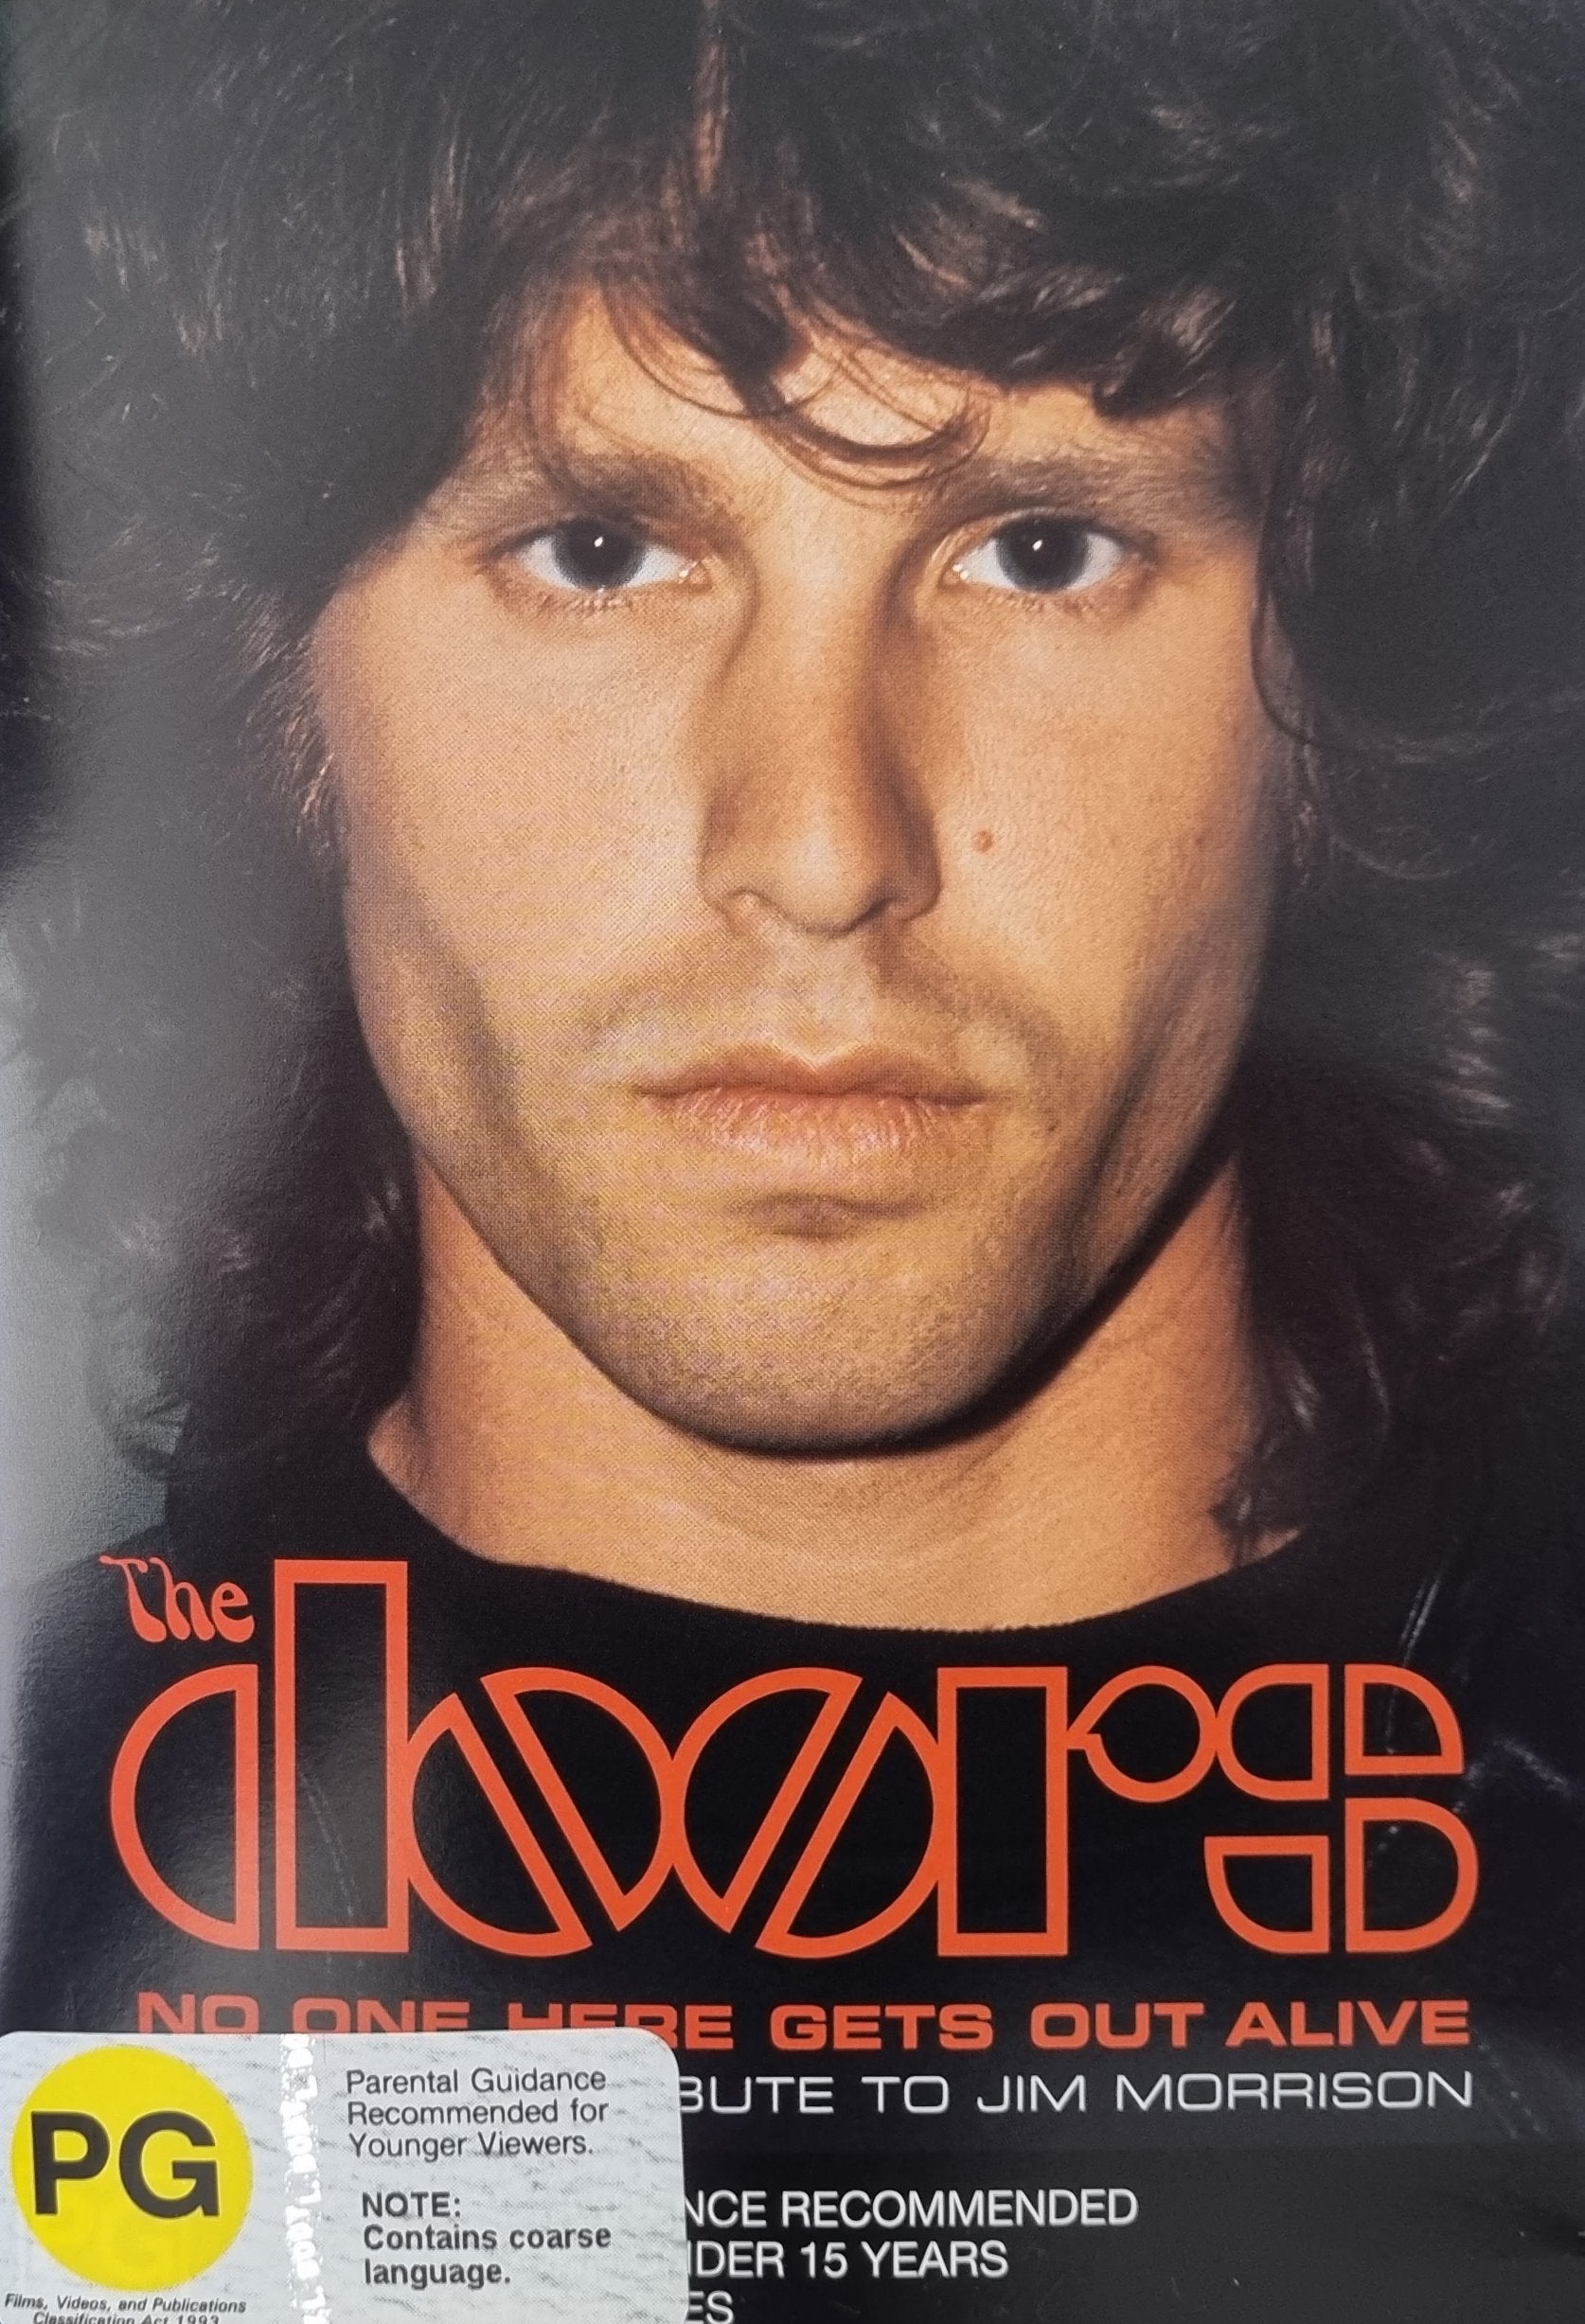 The Doors: No One Here Gets Out Alive